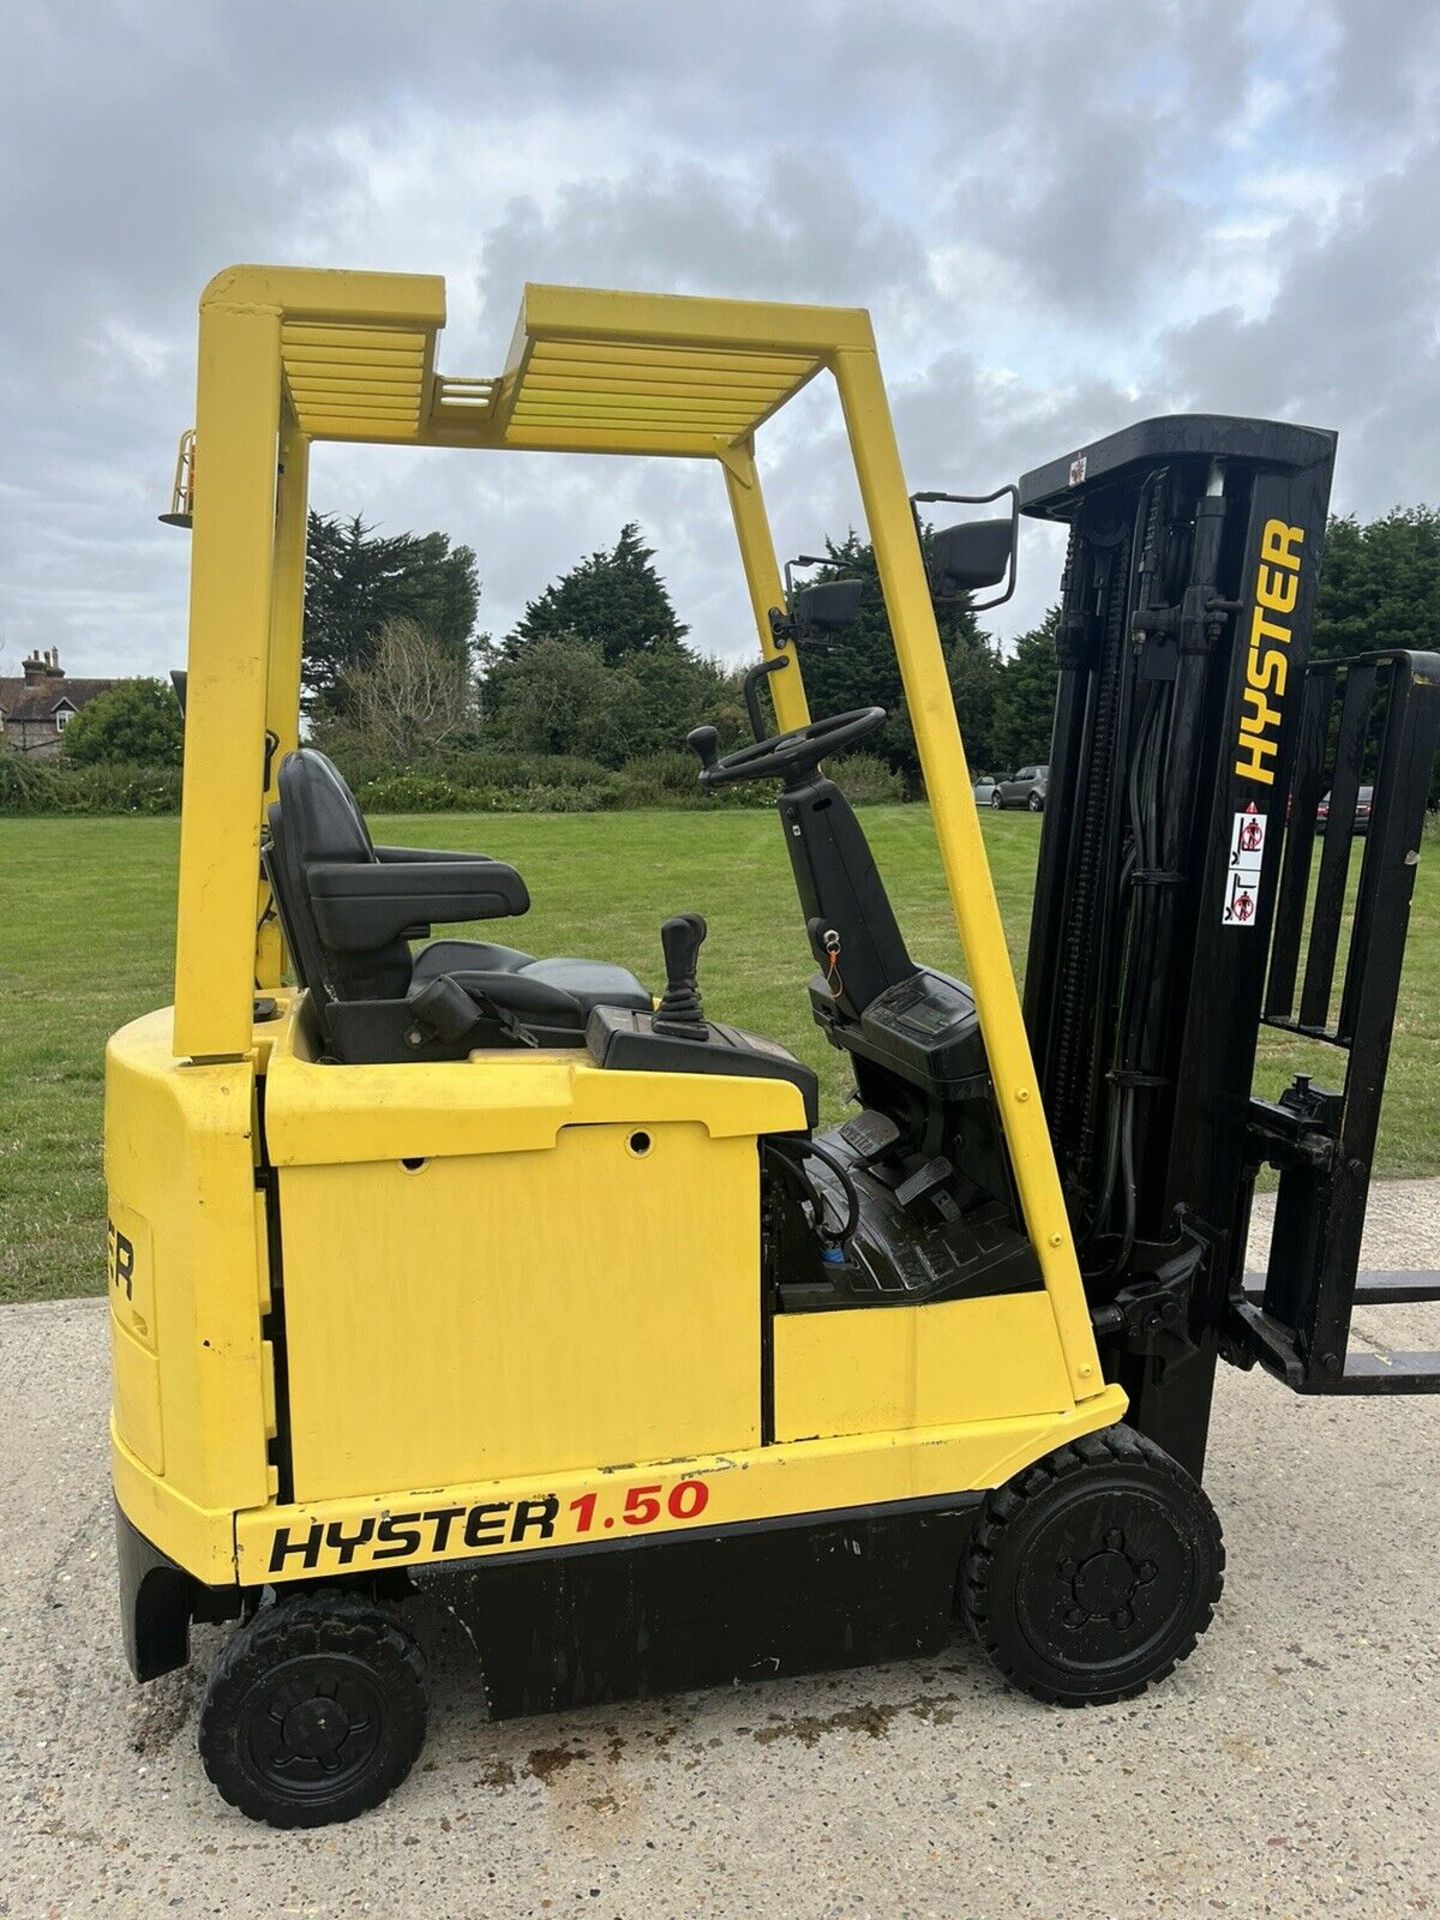 HYSTER, 1.5 Electric Forklift Truck - Image 3 of 3